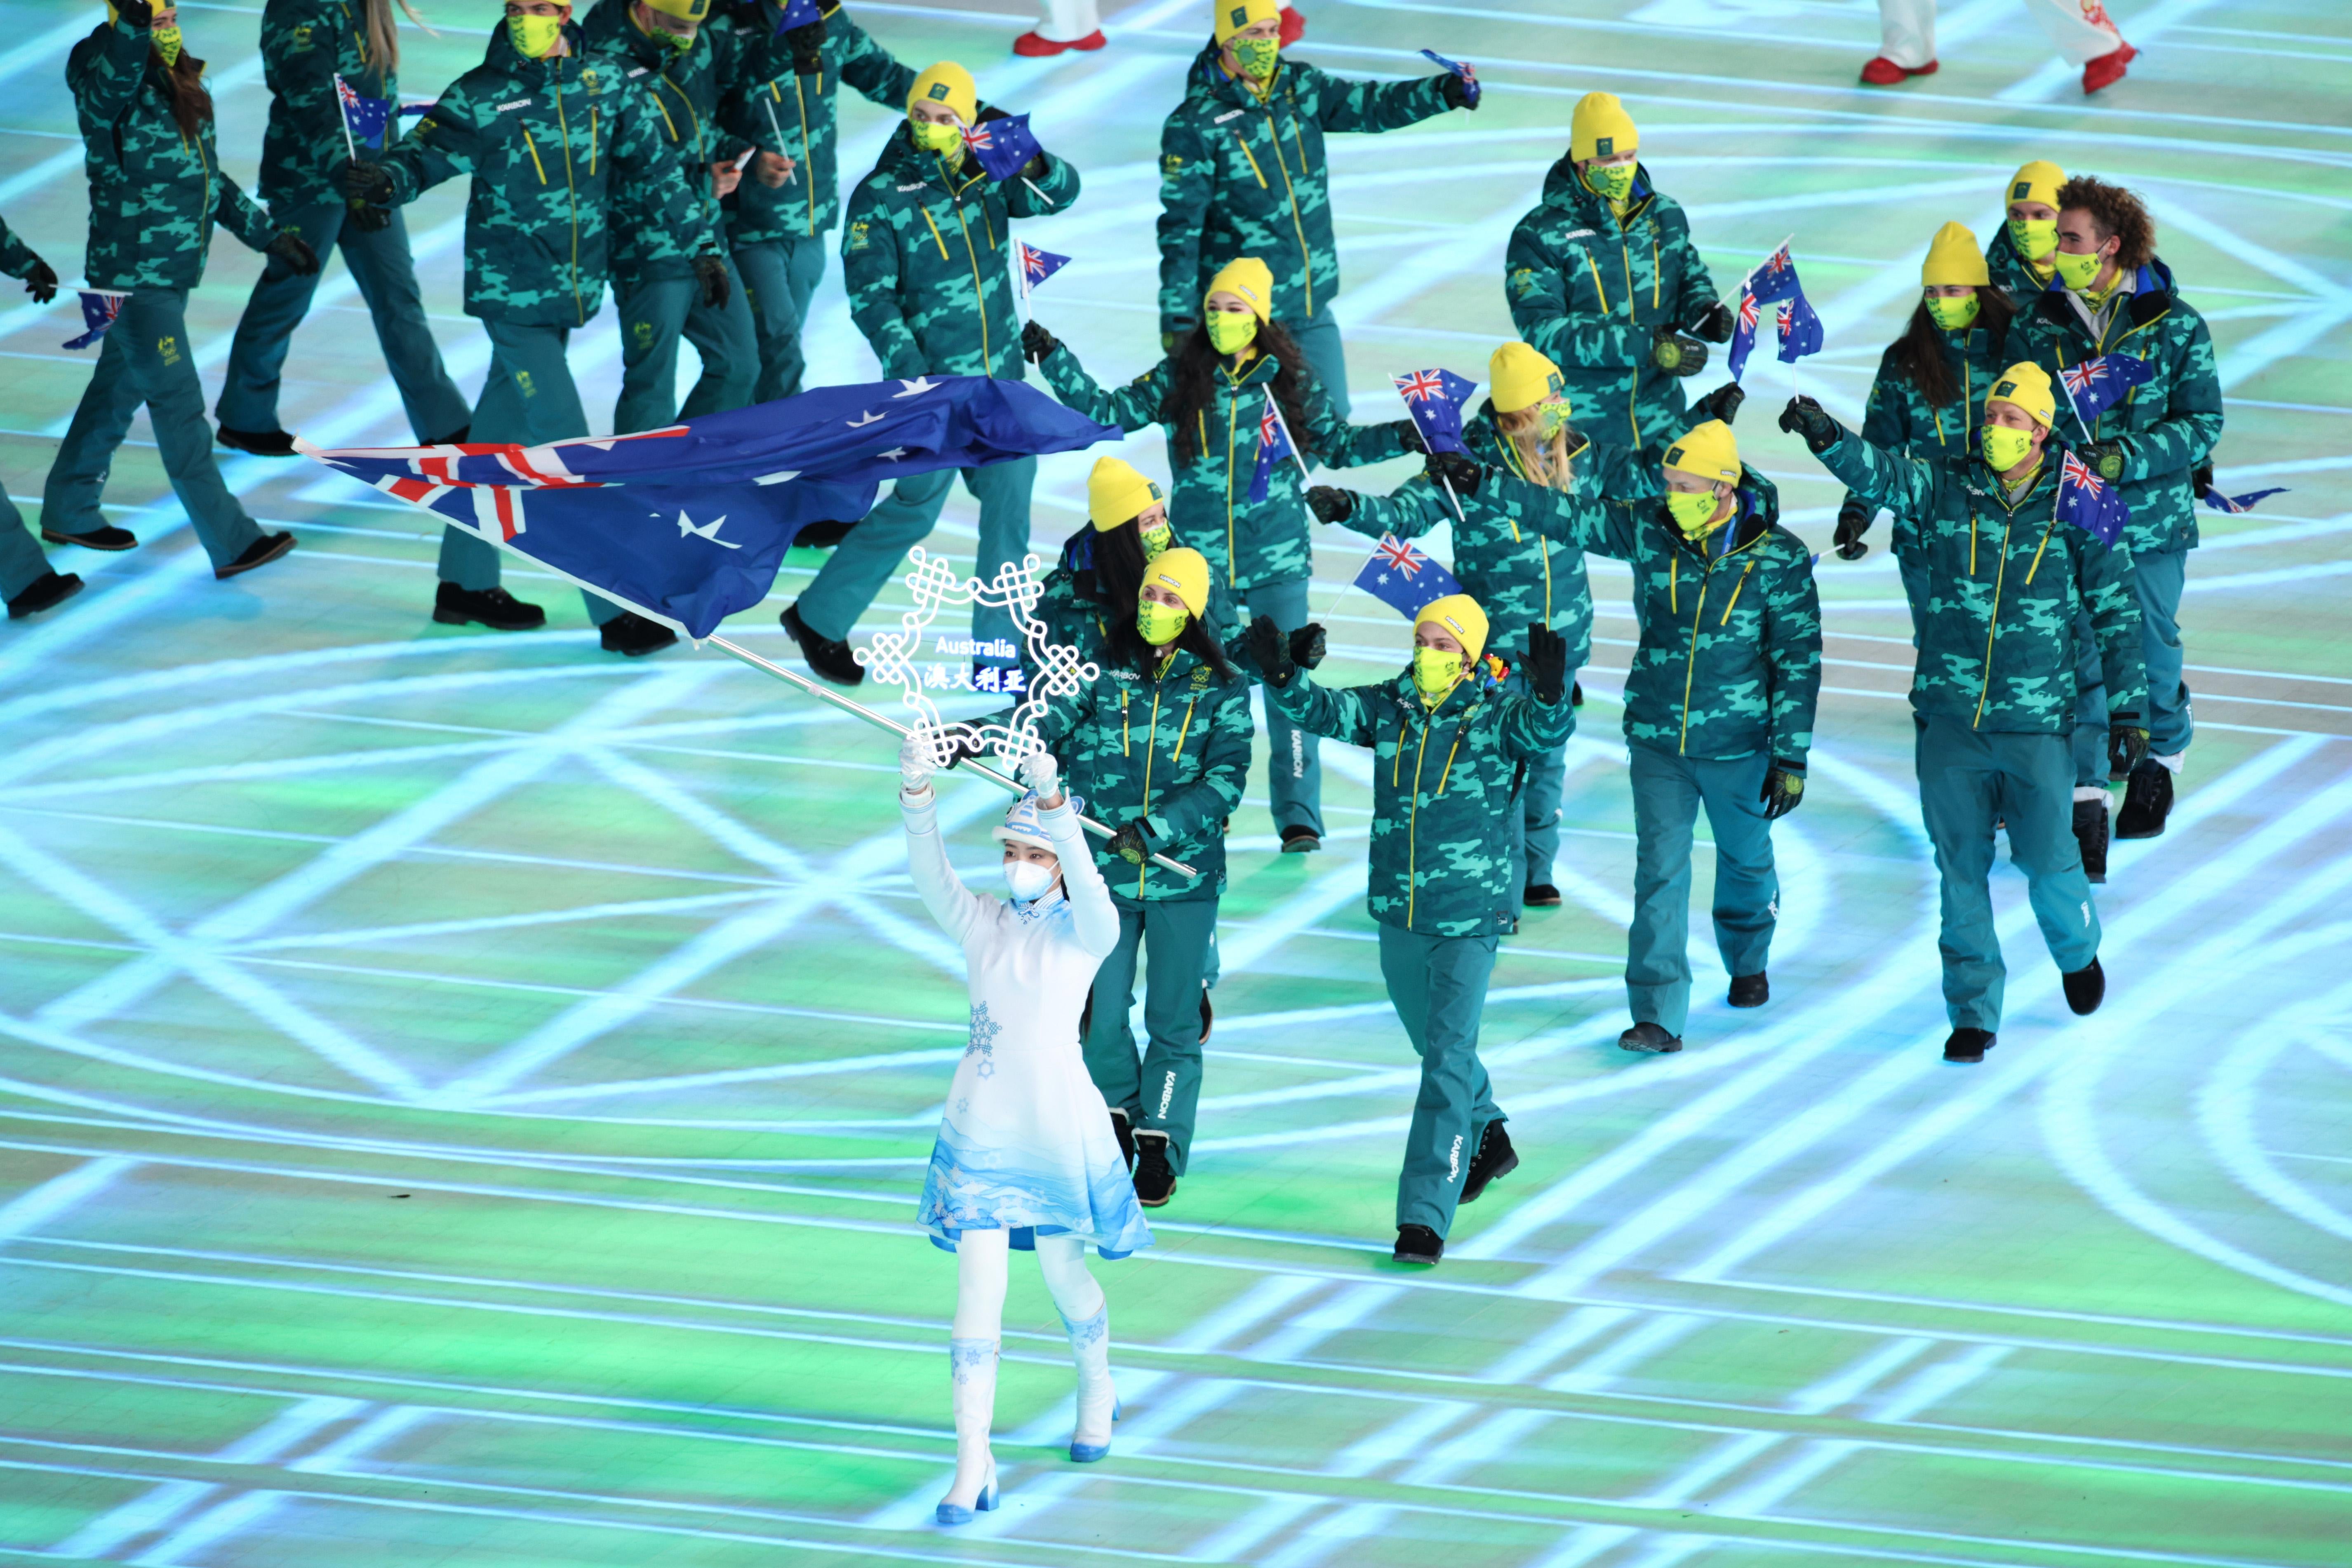 Members of Team Australia march as a group.